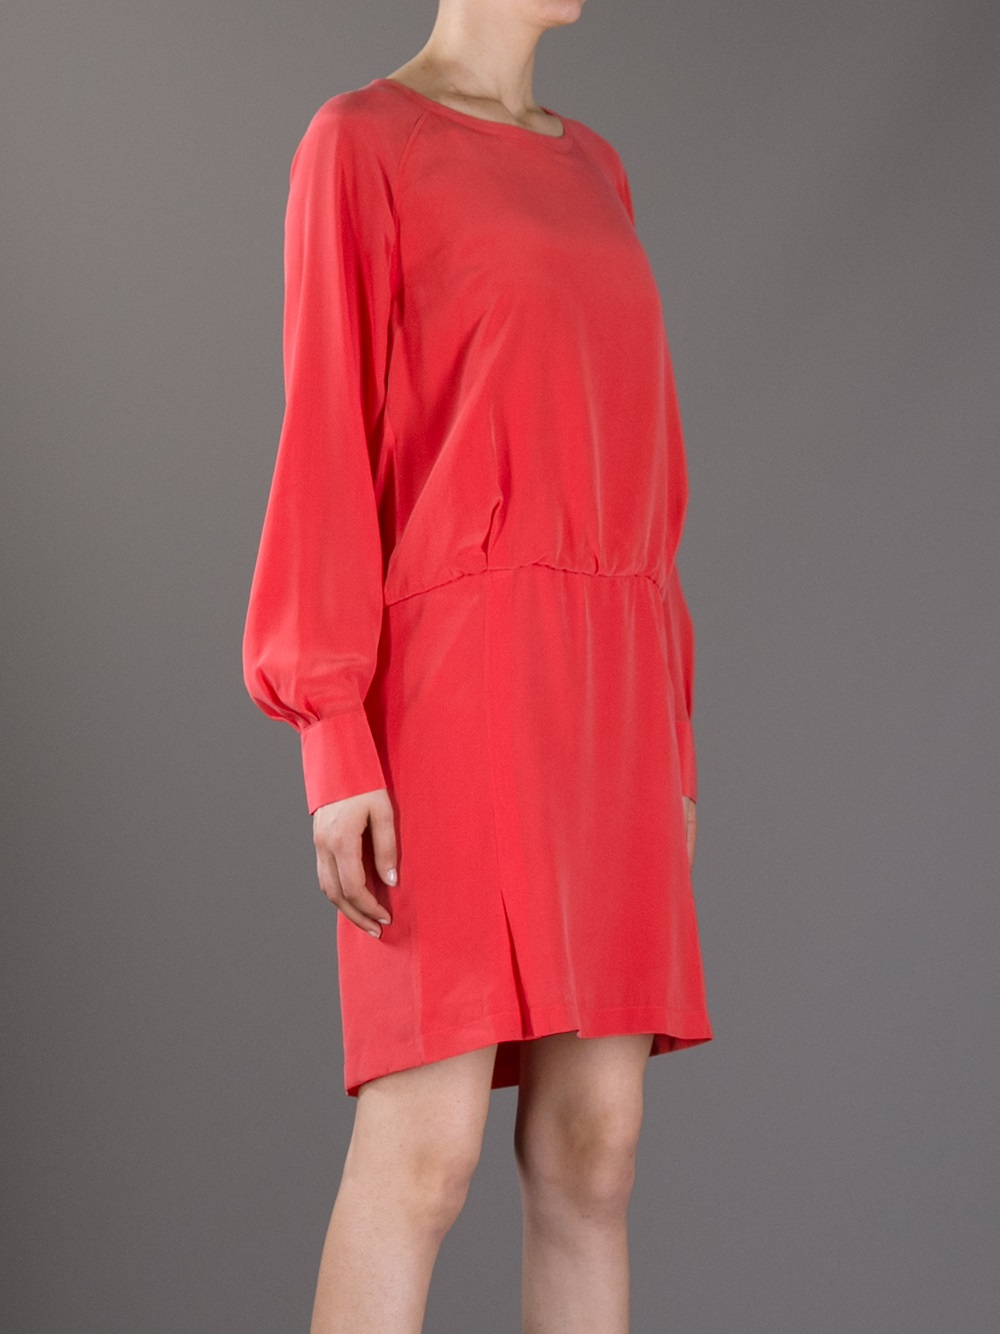 See By Chloé Silk Dress in Yellow & Orange (Red) - Lyst